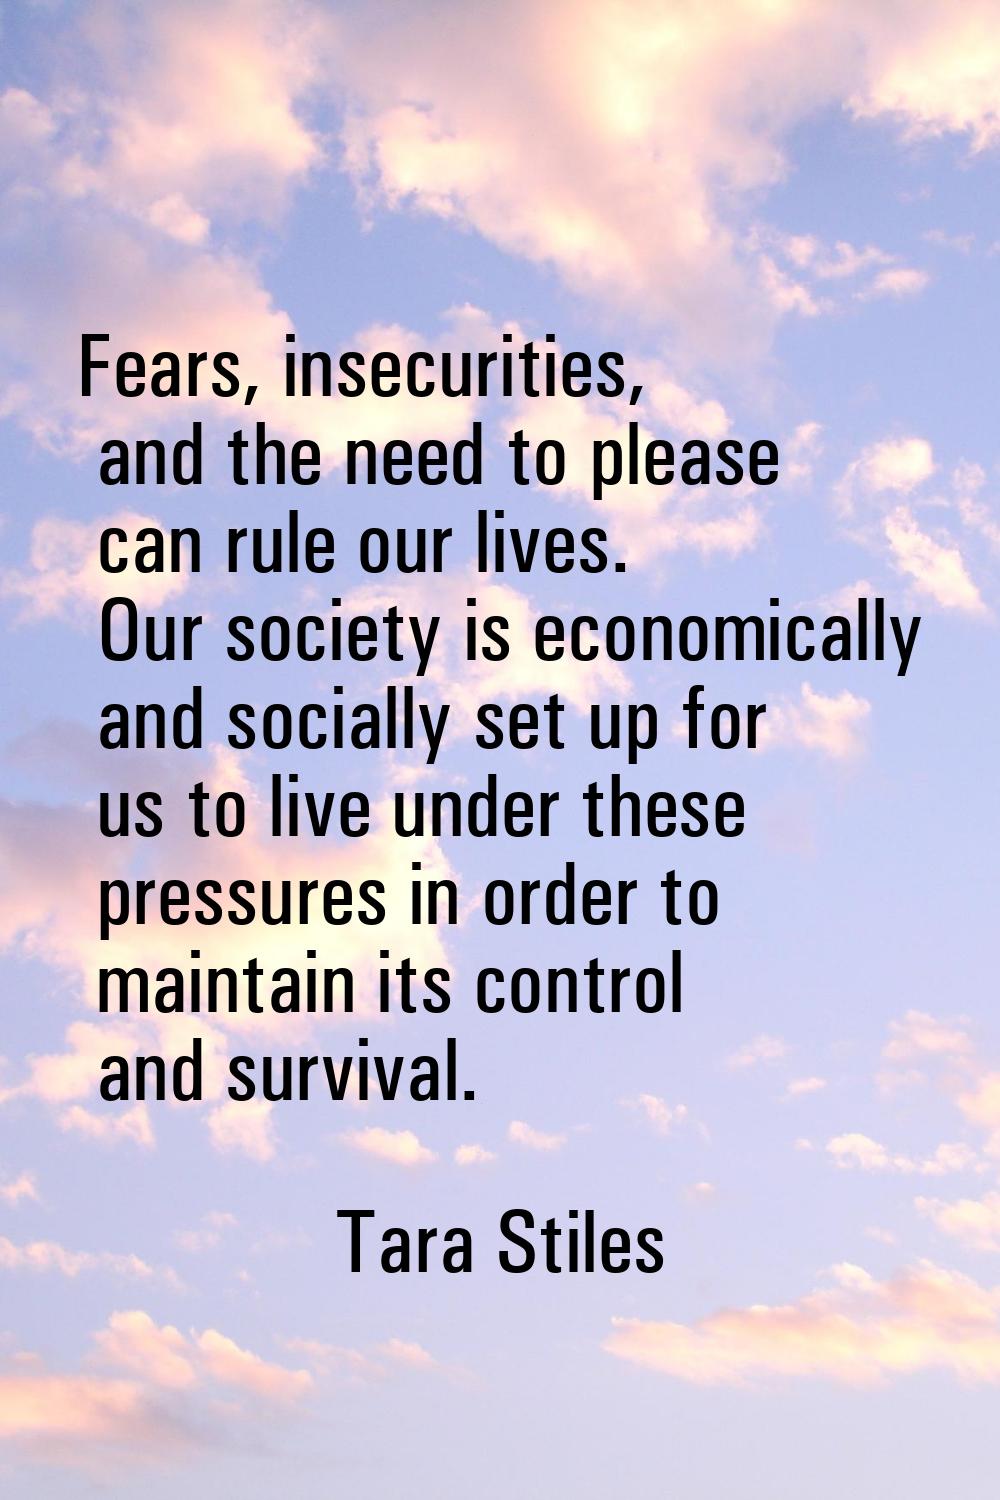 Fears, insecurities, and the need to please can rule our lives. Our society is economically and soc